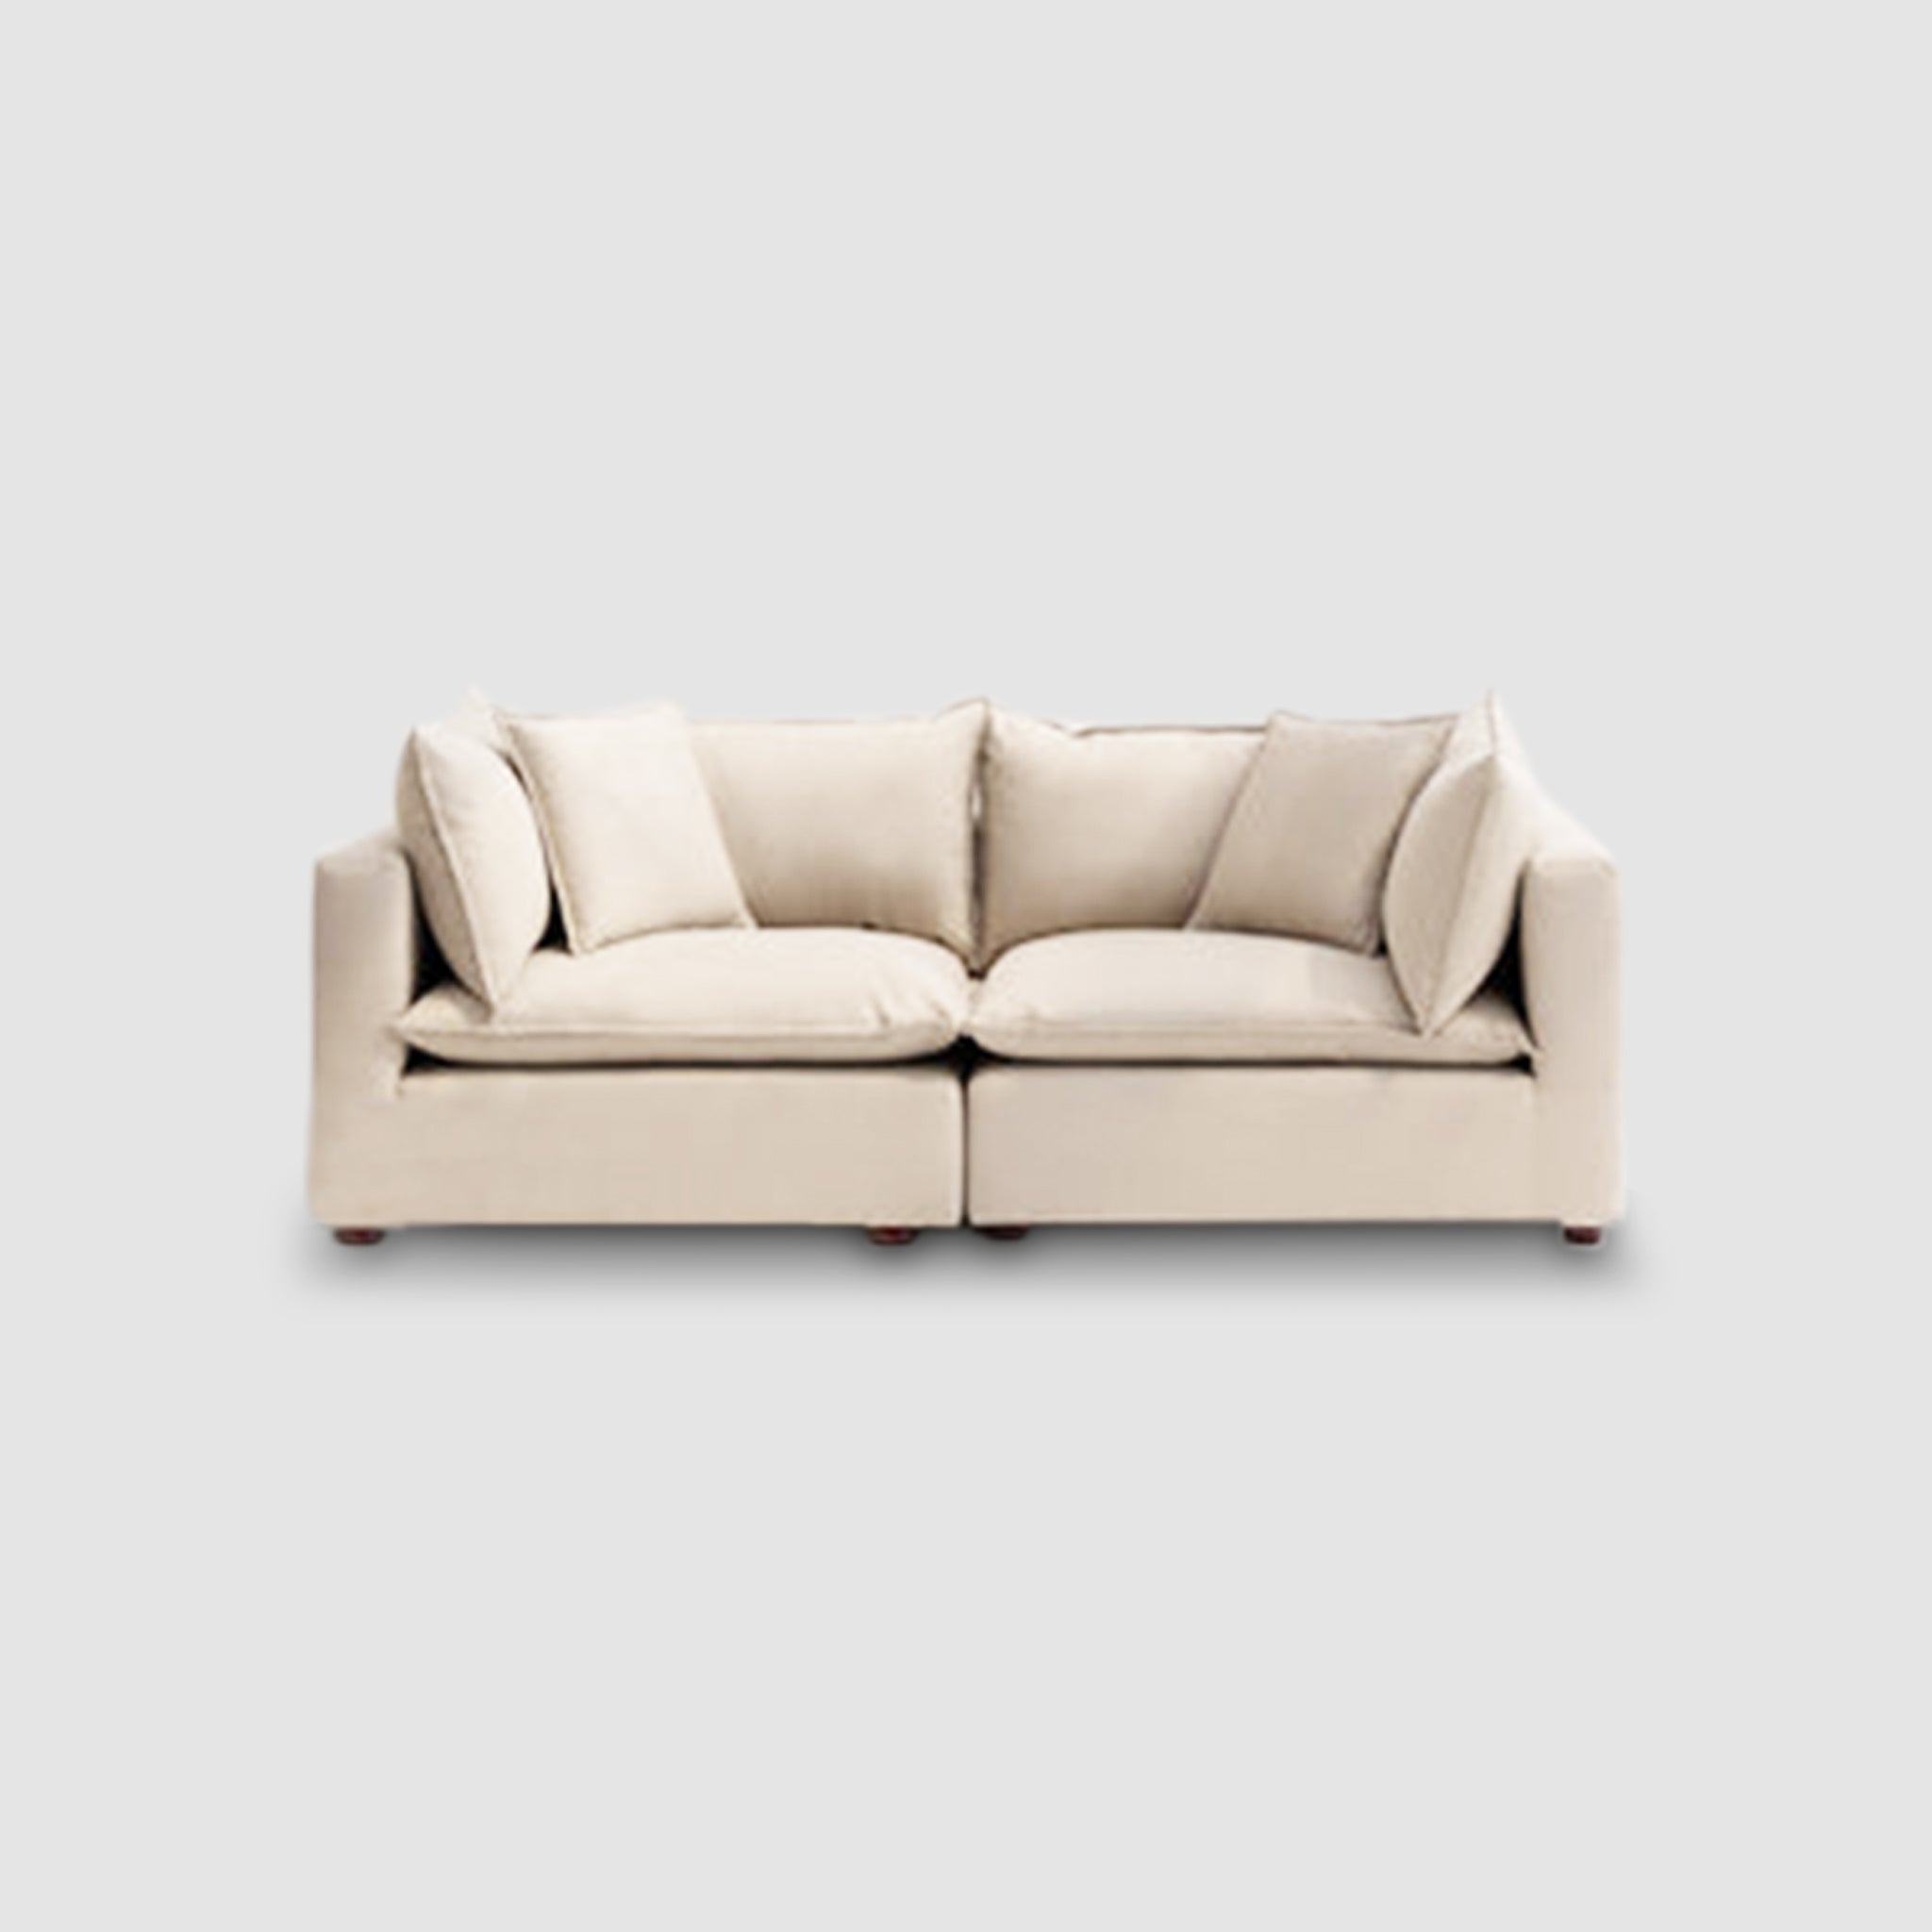 Beige loveseat sofa with plush cushions, ideal for small living spaces and modern home decor.